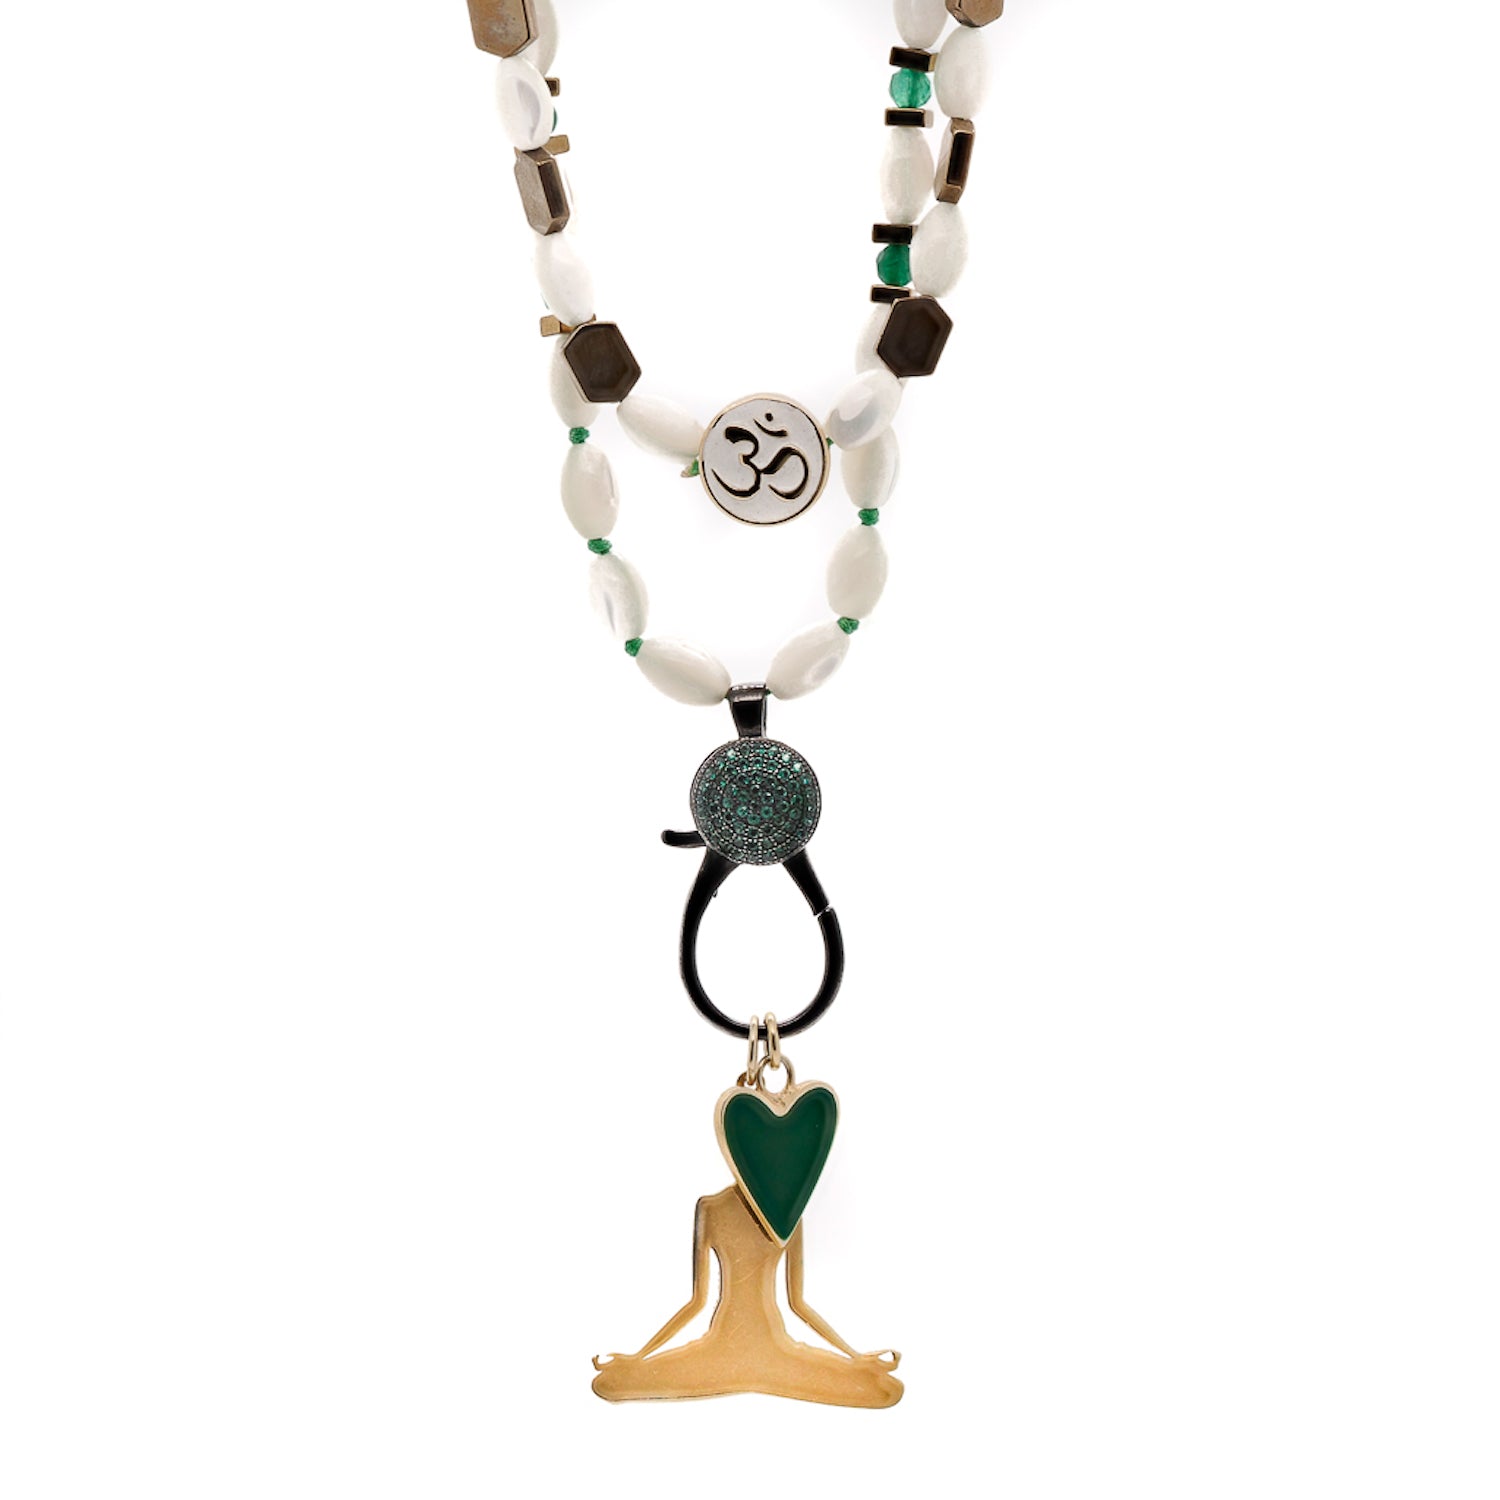 Pearl Yoga Meditation Necklace - Handcrafted with Symbolic Om Mantra and Tree of Life.